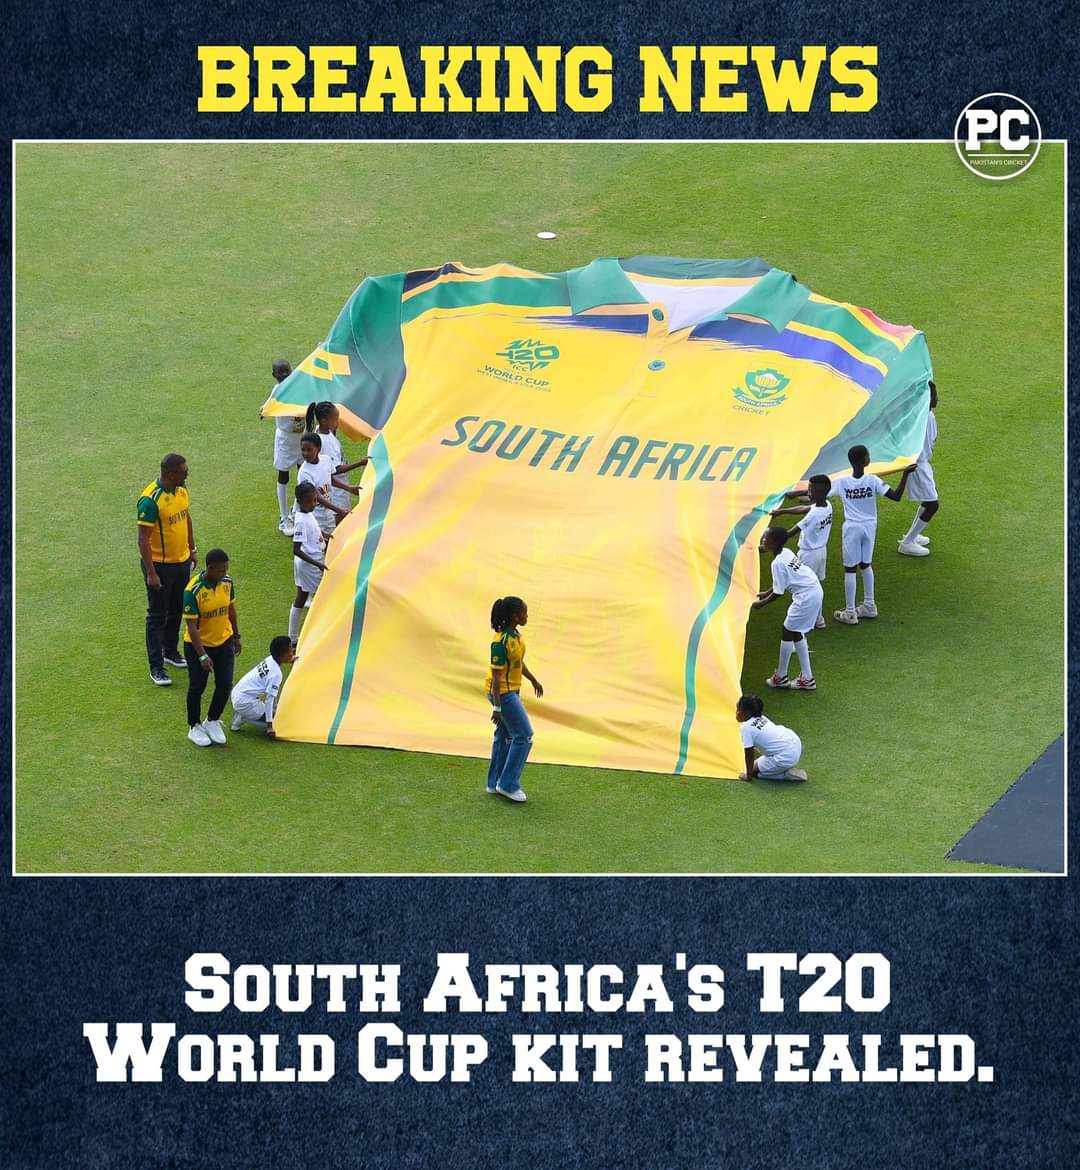 South Africa's T20 World Cup kit revealed.
#T20WorldCup24 #T20WC #southafricacricket